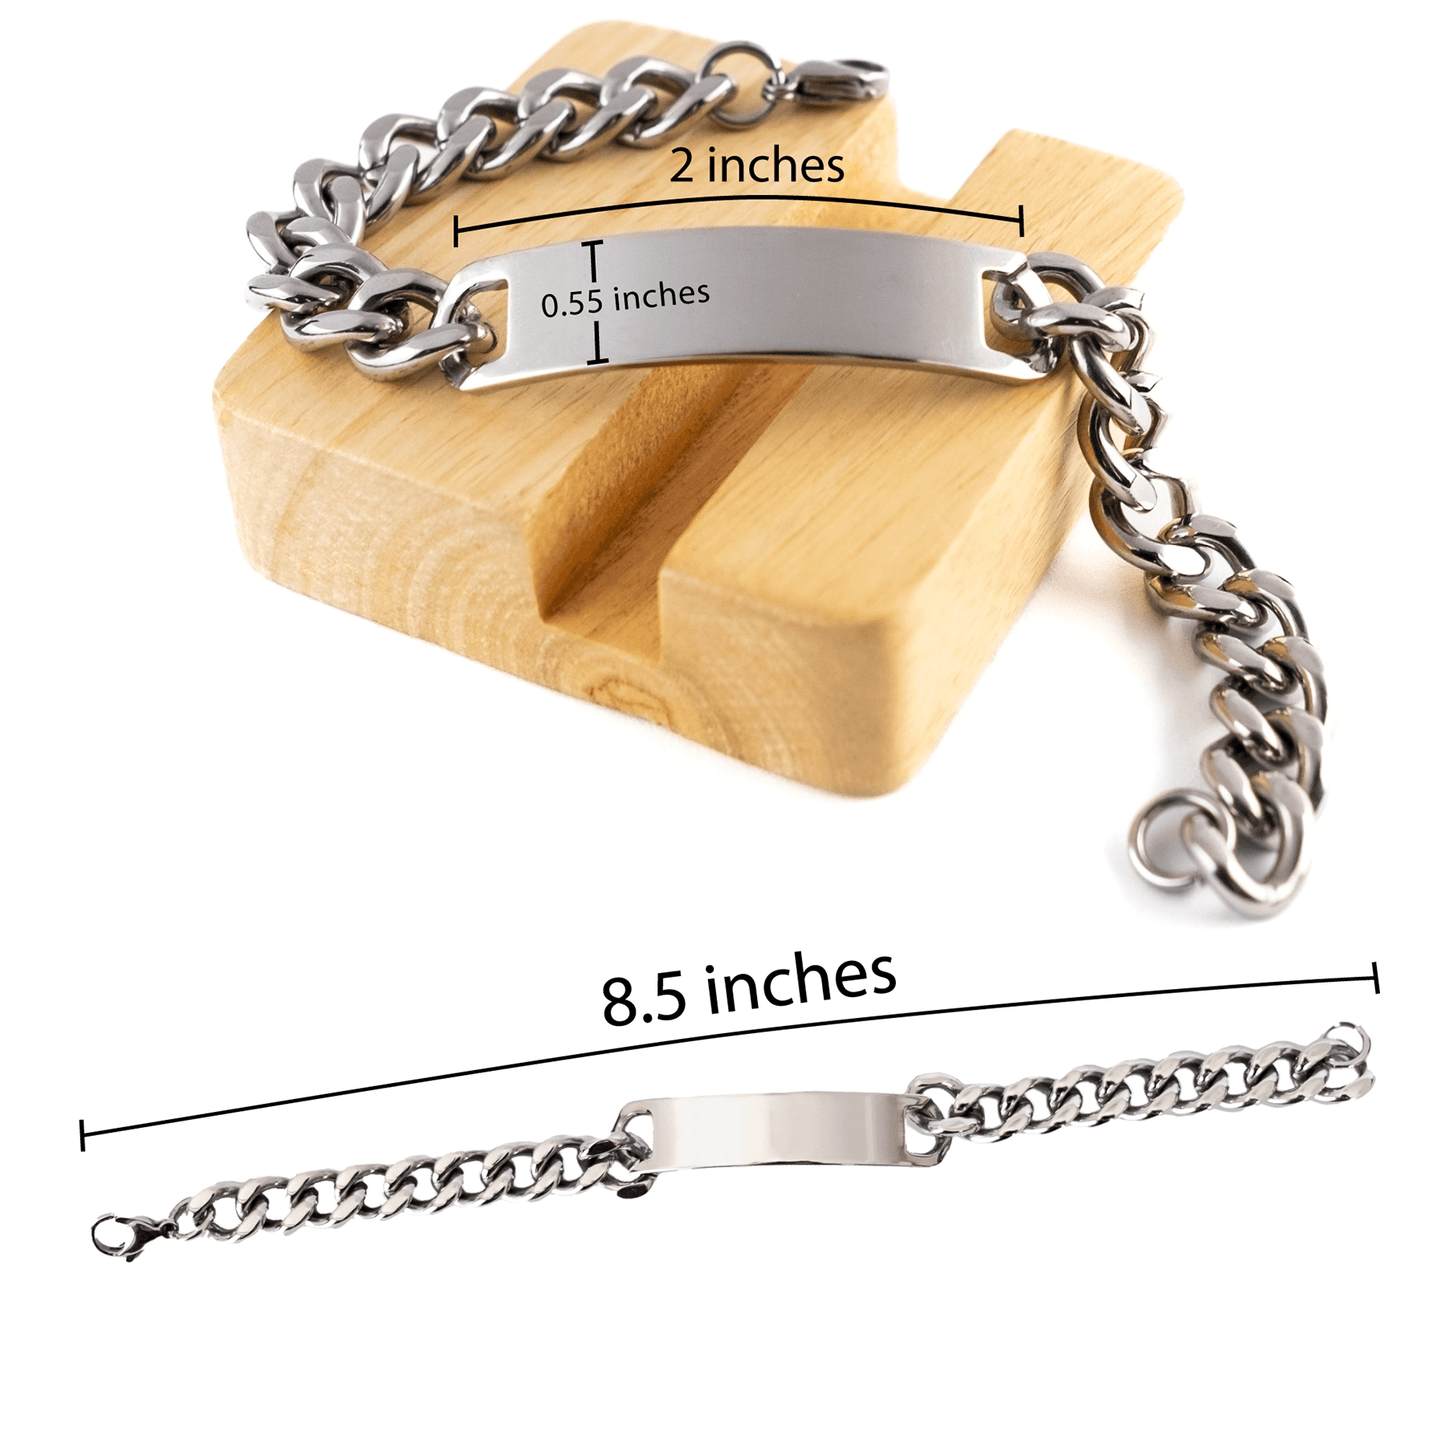 Remarkable Florist Gifts, Your dedication and hard work, Inspirational Birthday Christmas Unique Cuban Chain Stainless Steel Bracelet For Florist, Coworkers, Men, Women, Friends - Mallard Moon Gift Shop